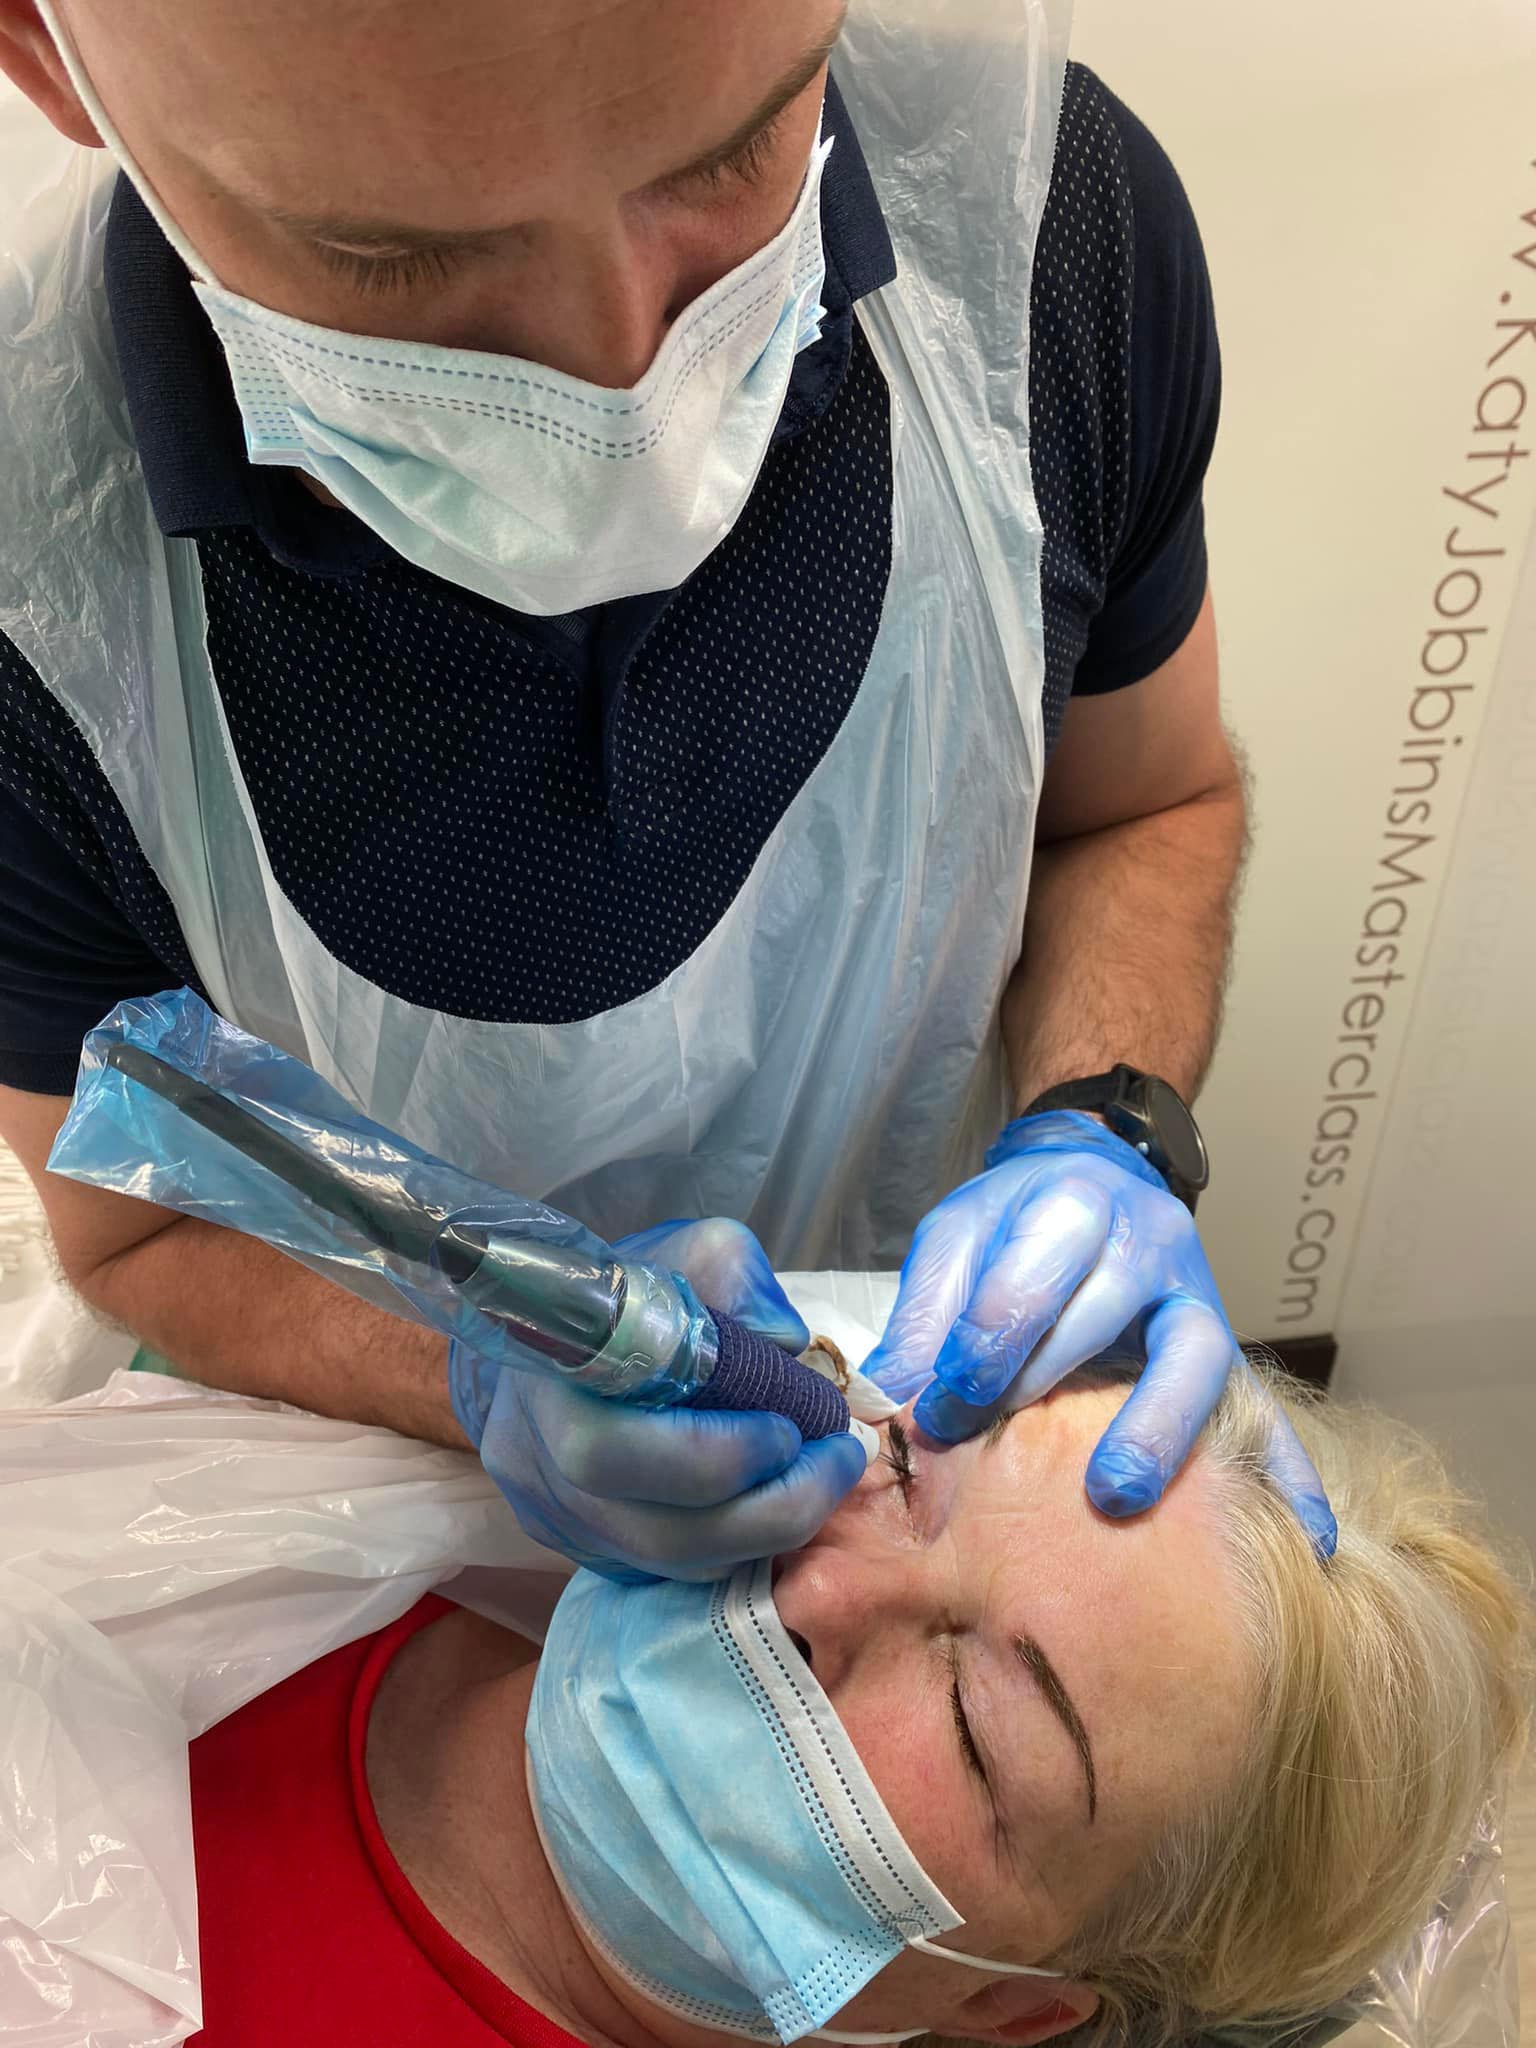 Lee Performing Permanent Makeup on a Client